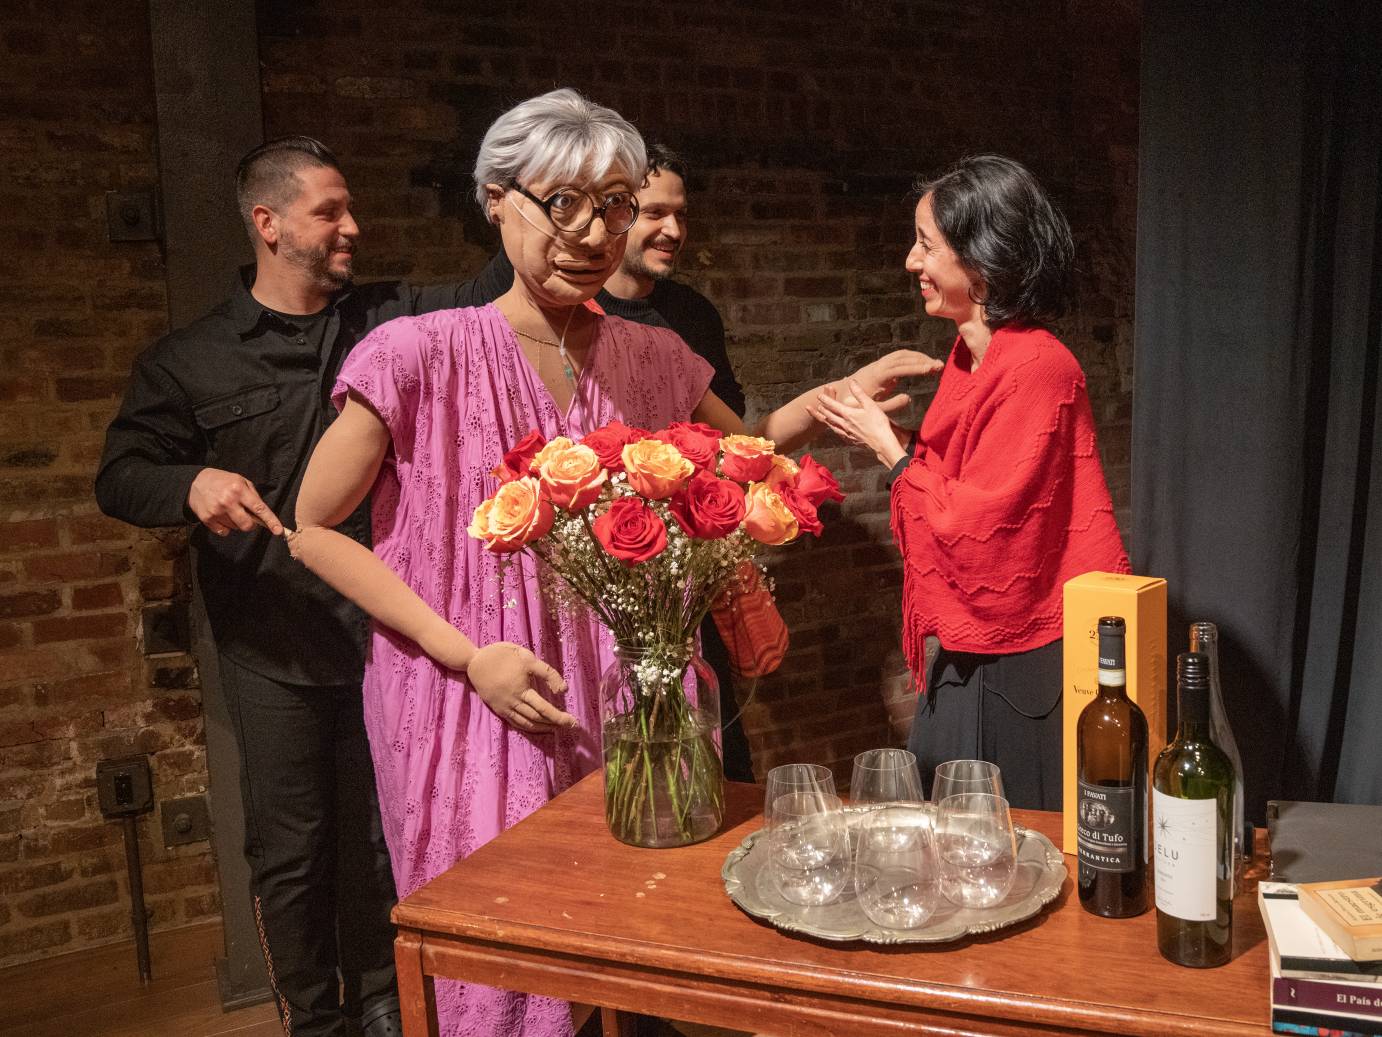 Sonia, the puppet, dressed in a pink frock, gray-haired wears dark framed round glasses. Her two male puppet handlers and a dark haired woman wearing a red shawl smile at one another. Bottles of alcohol and glasses resting on a silver tray, sit atop a table. a vase of red and apricot roses gather in a vase. Sonia stands in front of the roses